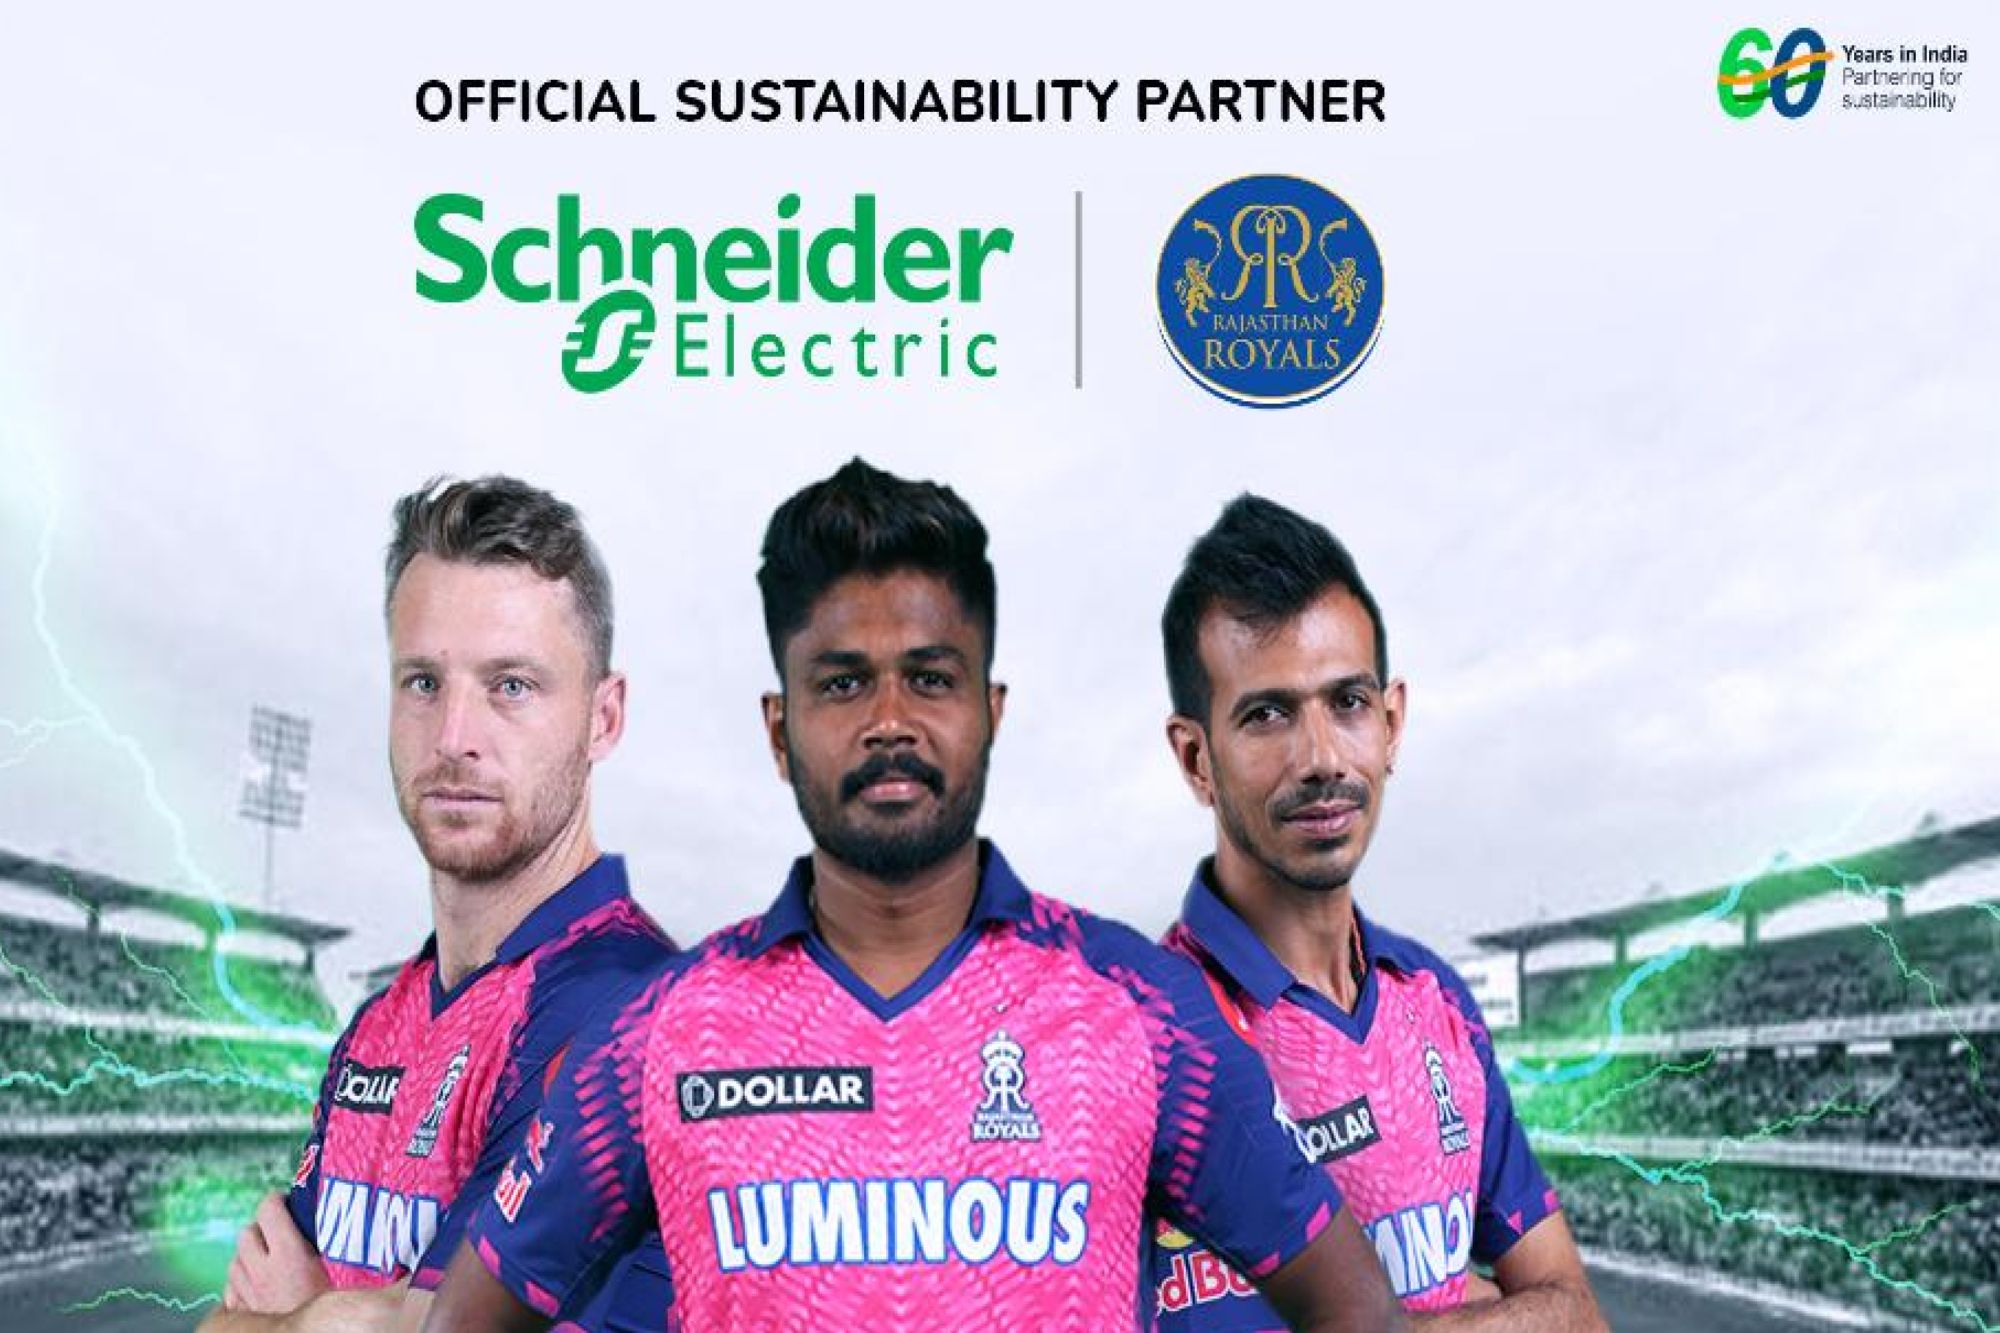 Schneider Electric renews partnership with Rajasthan Royals to promote sustainability